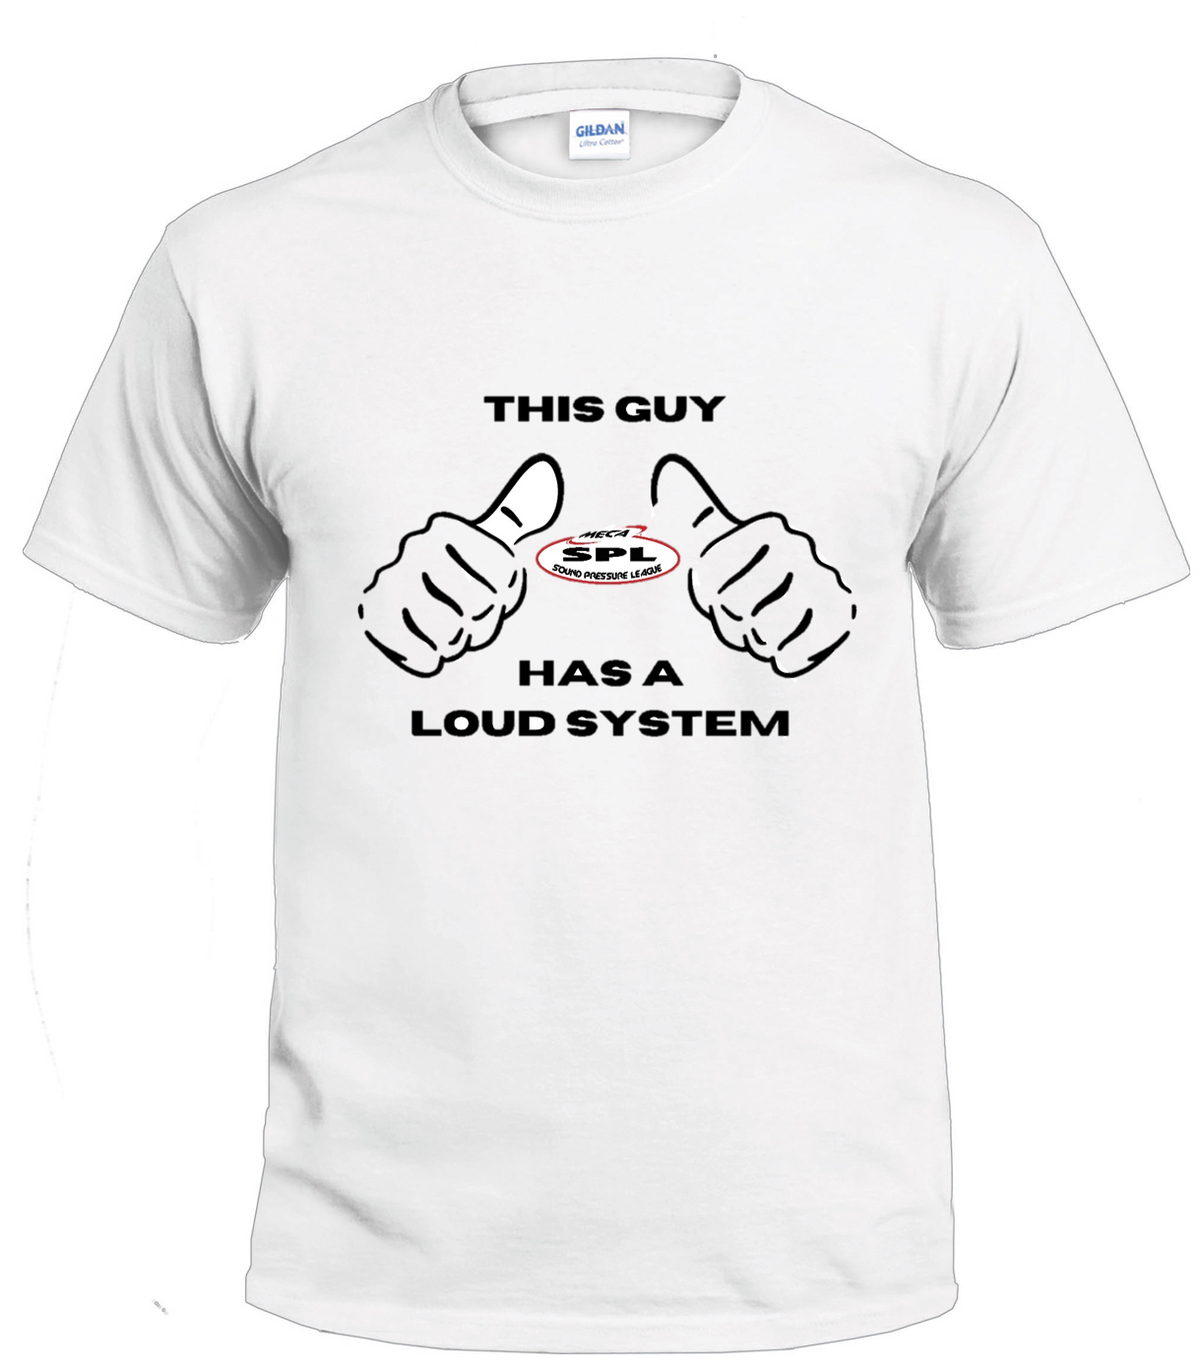 This Guy Has a Loud System t-shirt